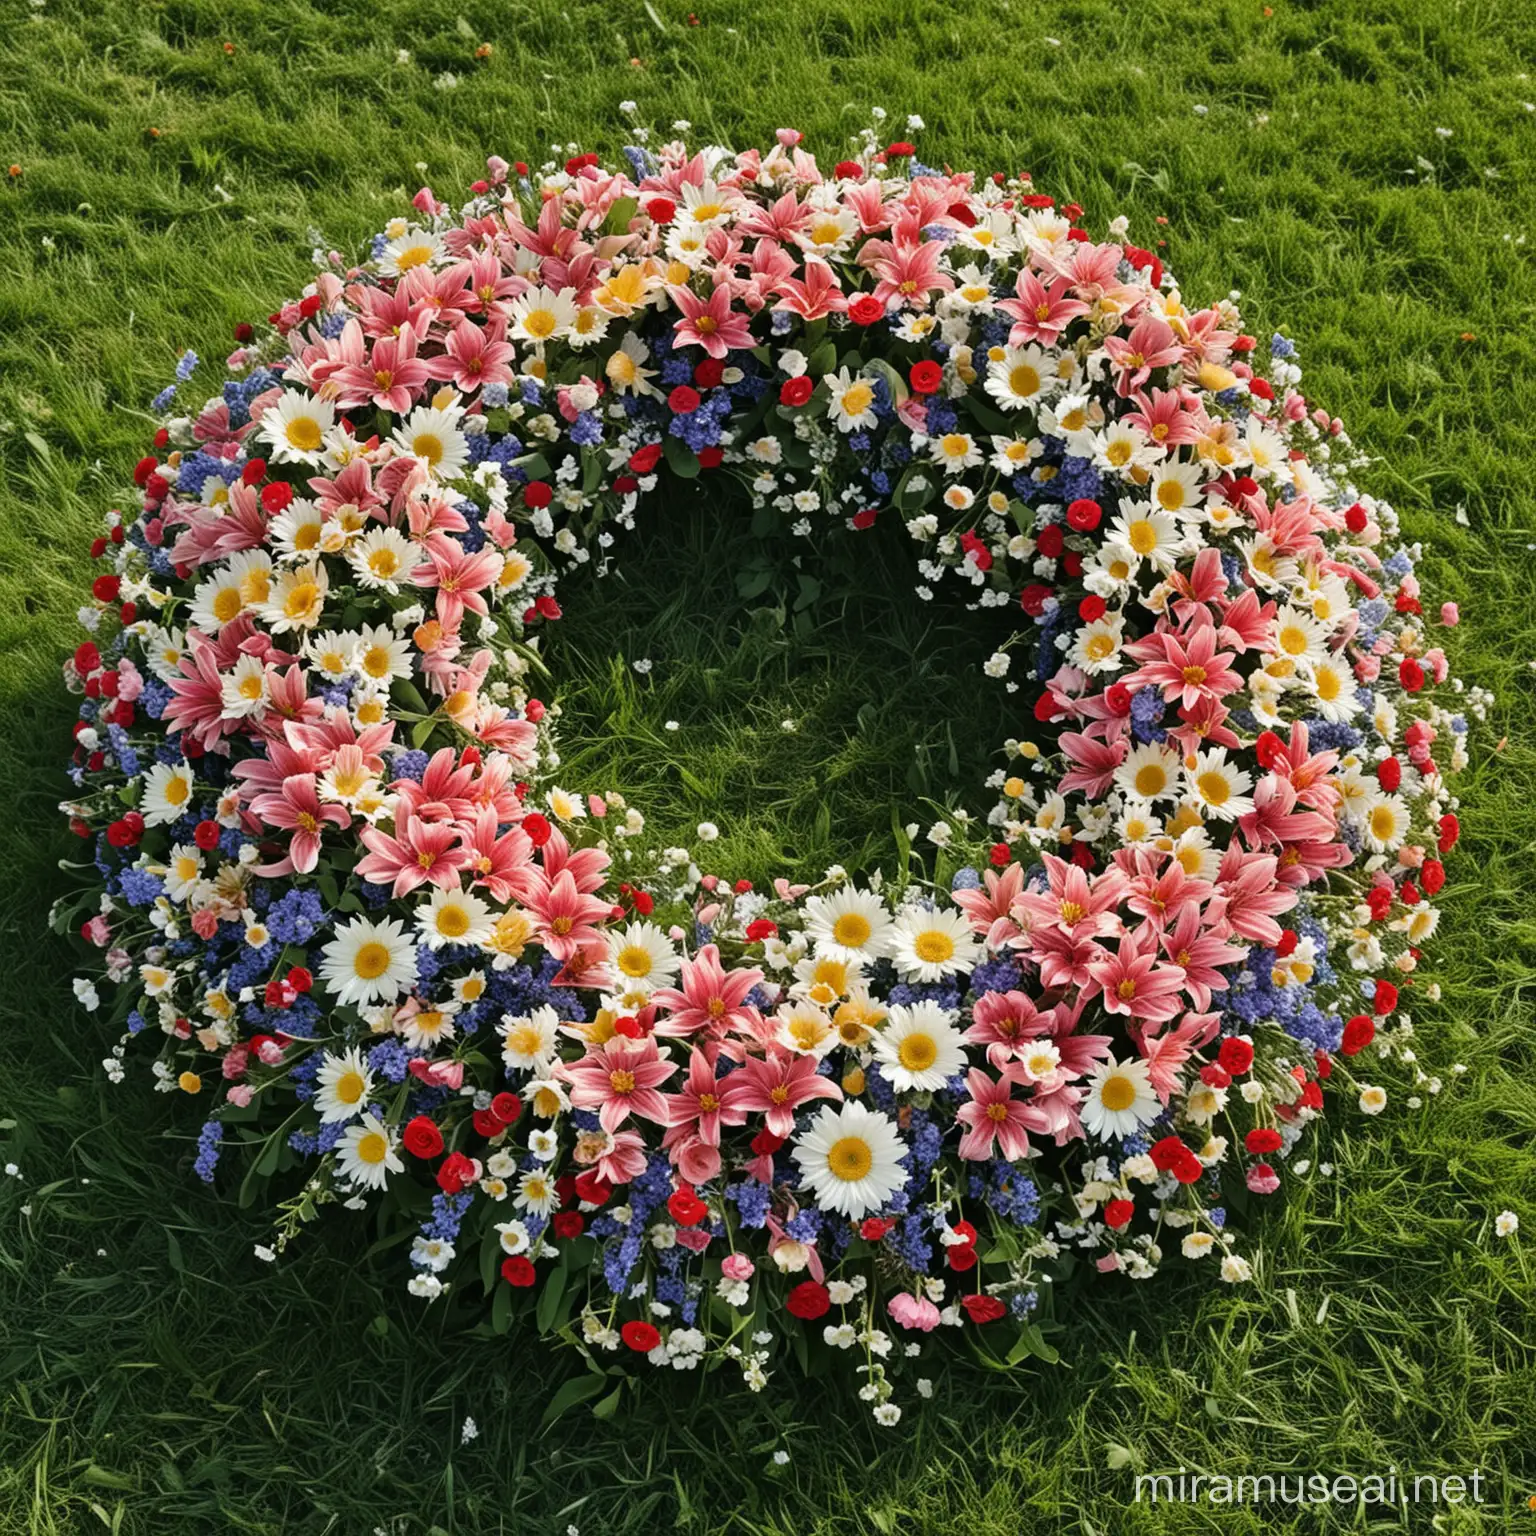 Meadow full of flowers, in the middle lies a large funeral wreath